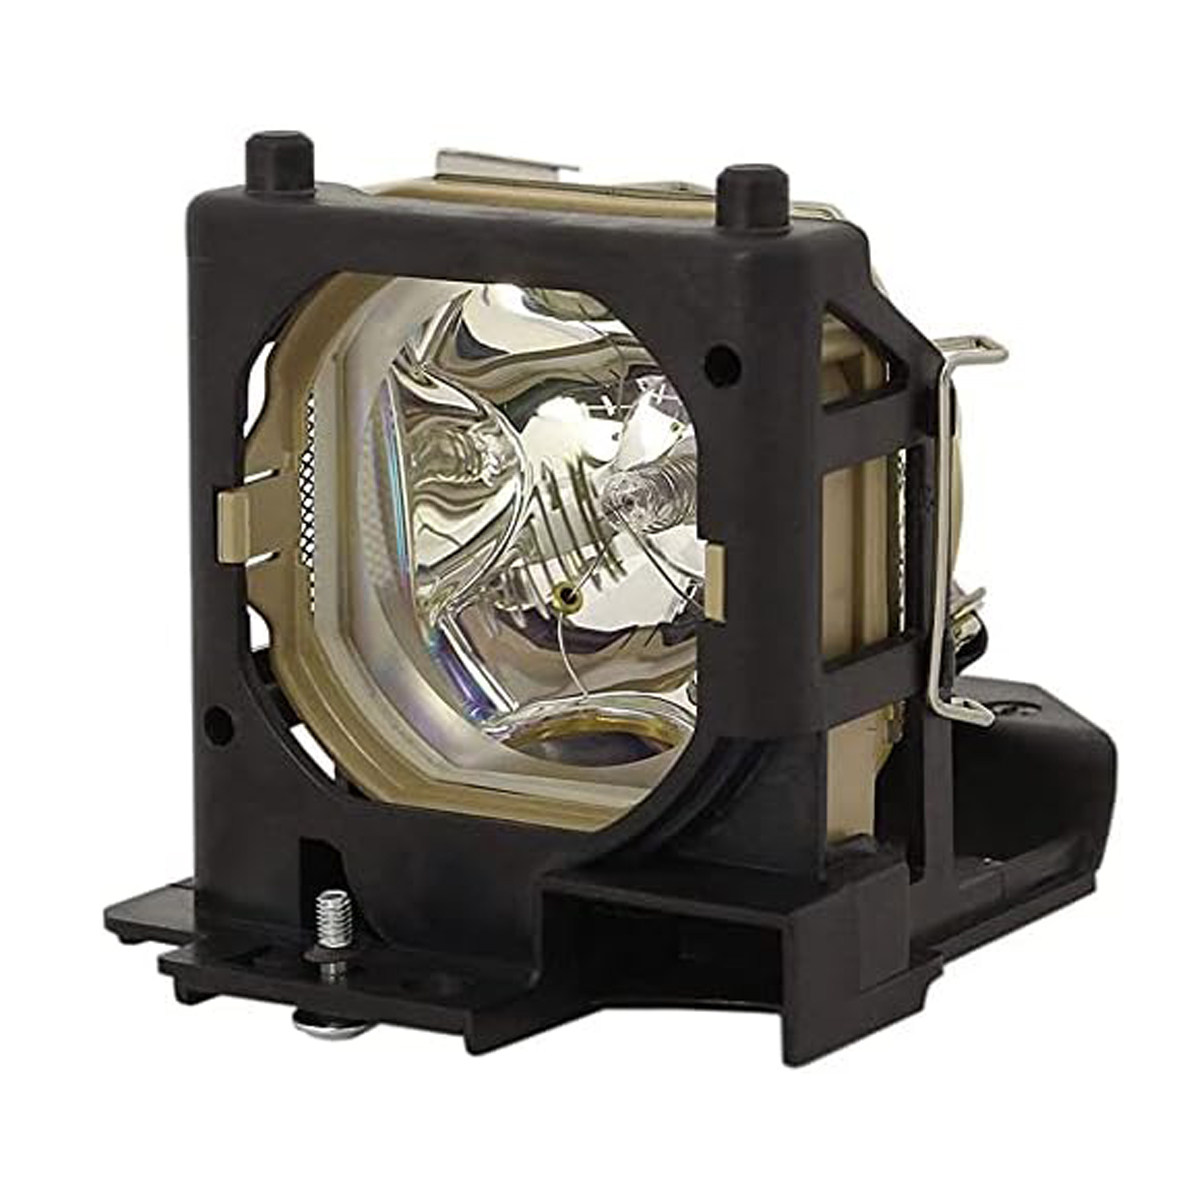 Replacement Projector lamp 78-6969-9790-3 For 3M S55 X45 X55